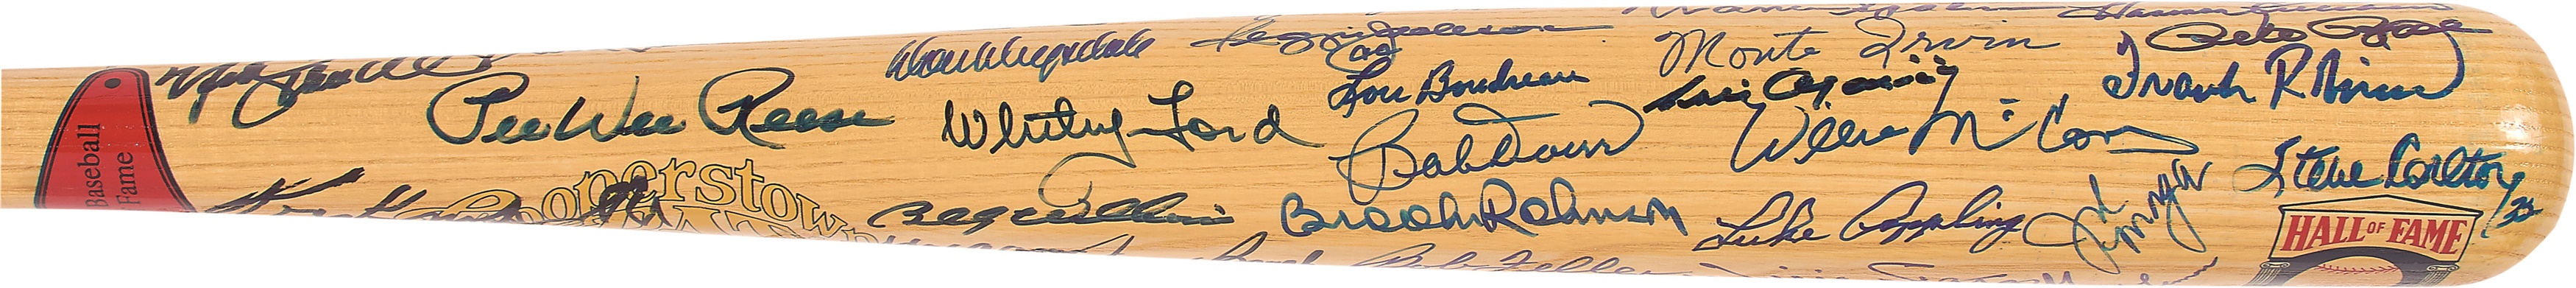 Baseball Autographs - Loaded Hall of Fame Signed Cooperstown Bat with Roy Campanella - 50+ Signatures